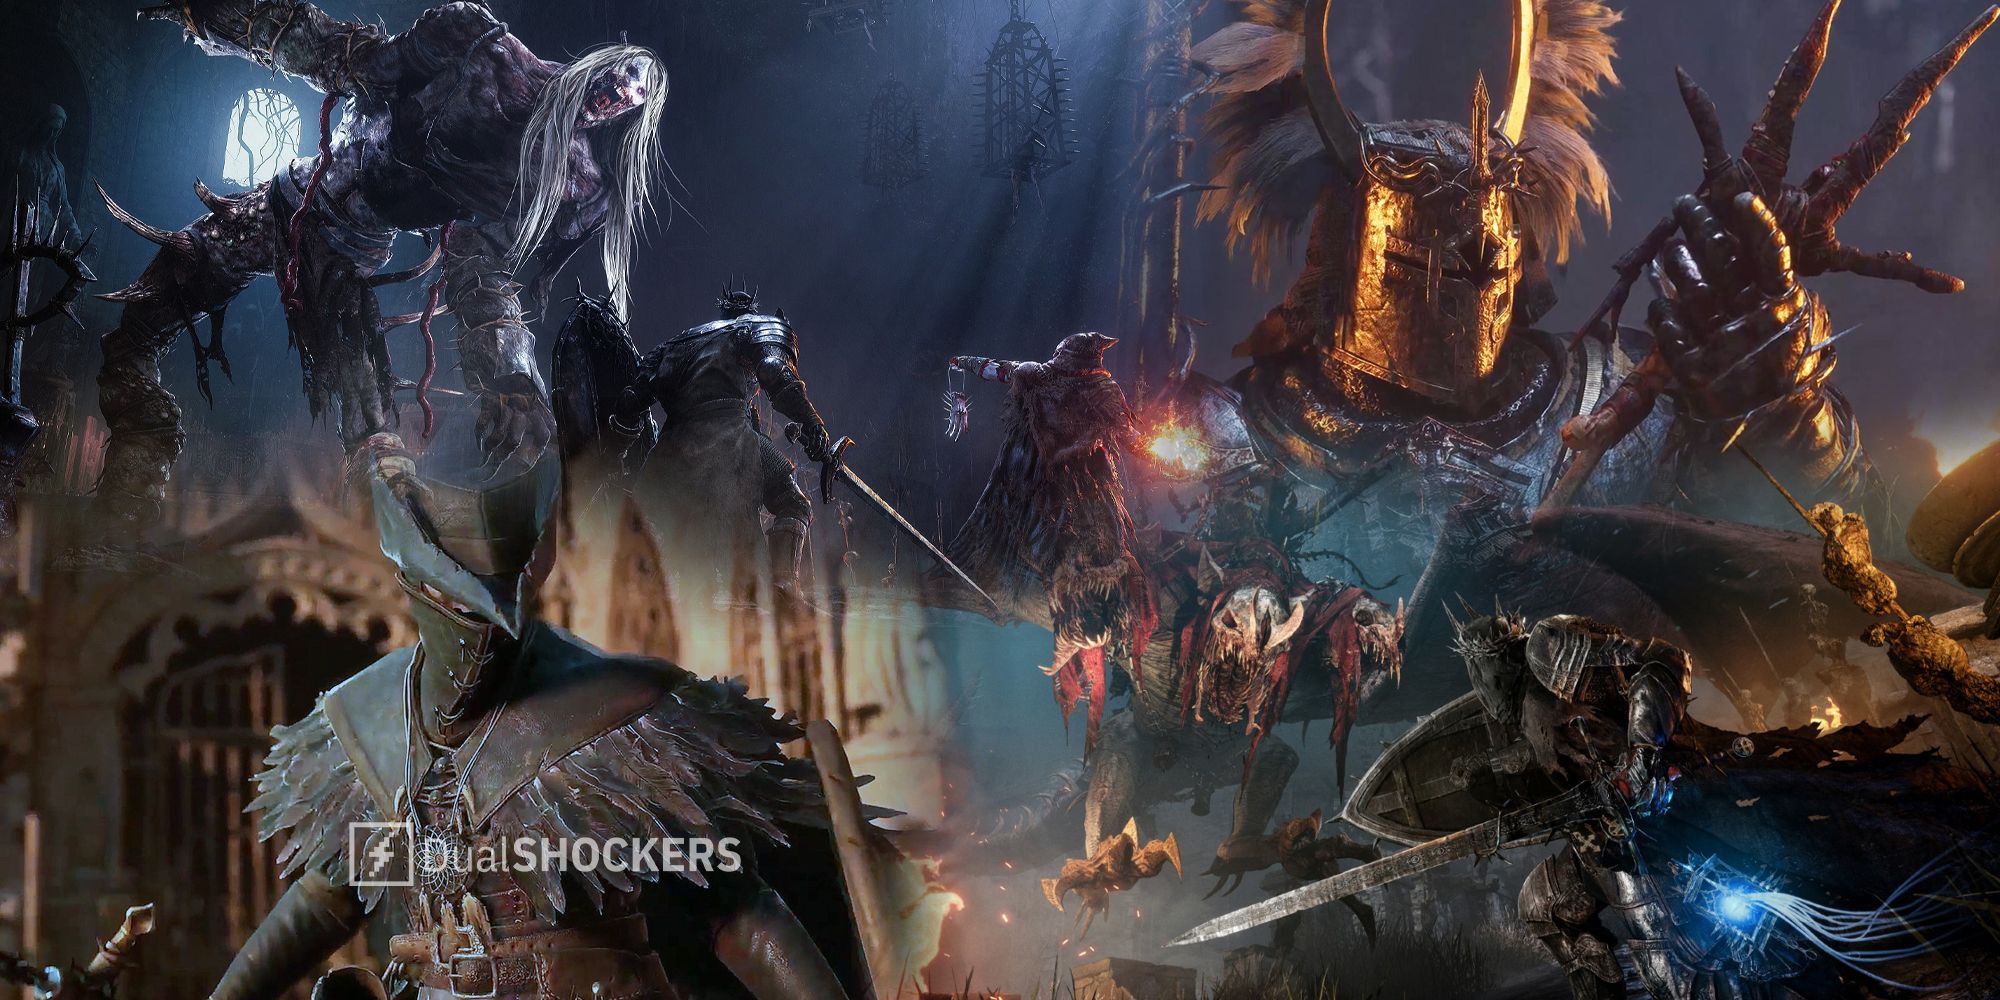 Lords of the Fallen Release Date : Spoilers, Streaming Schedule